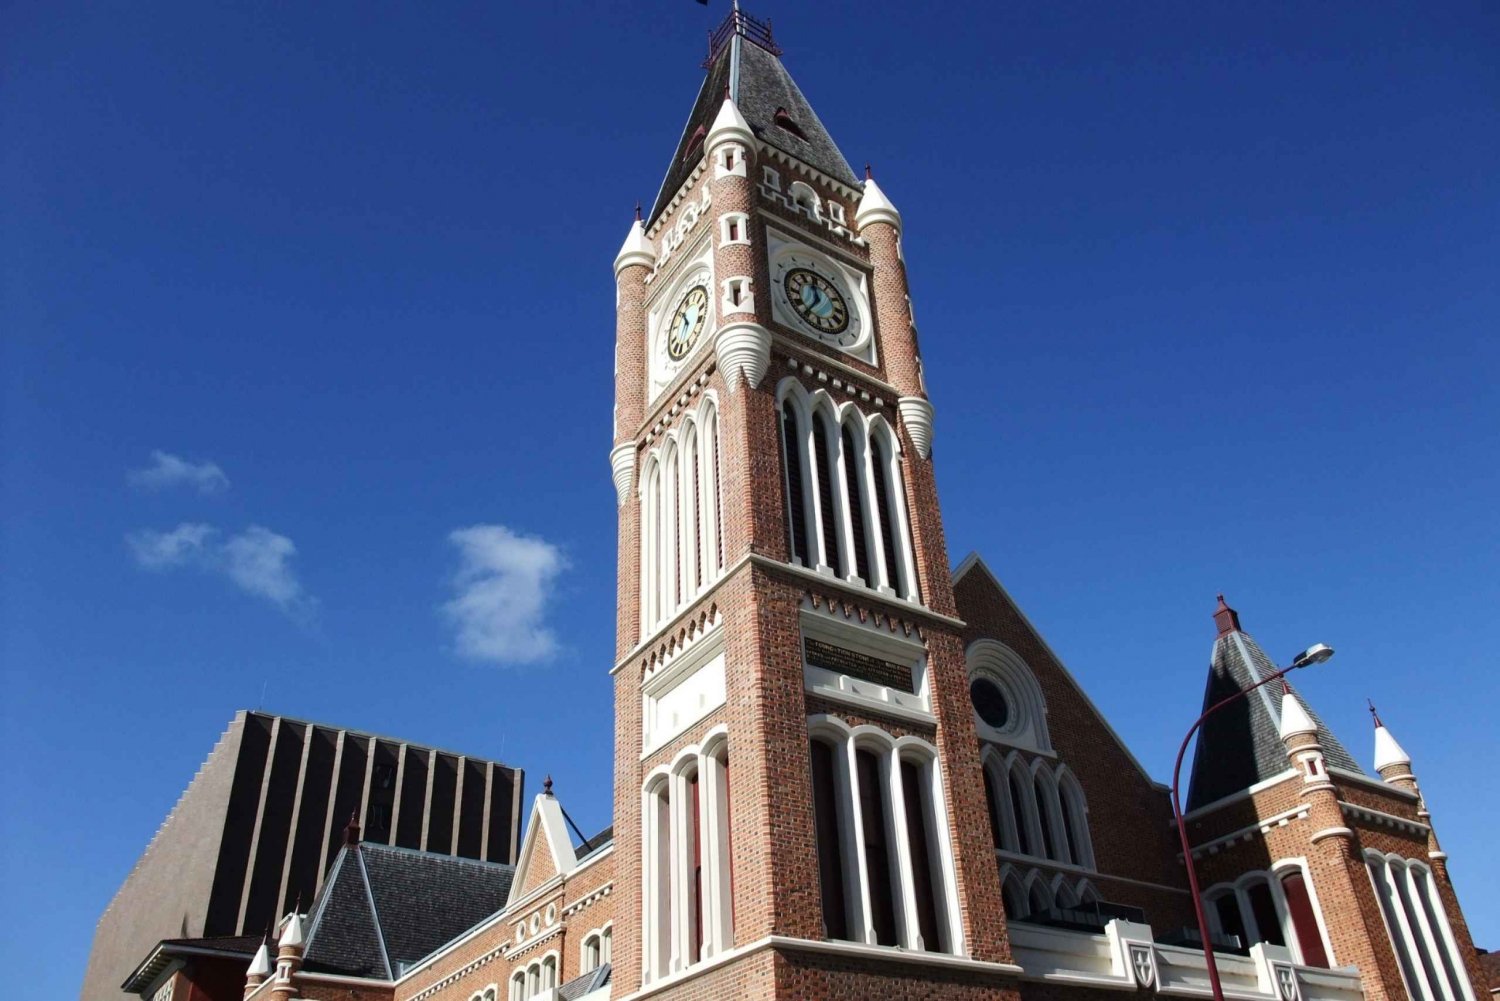 Perth Highlights Self-Guided Scavenger Hunt and Walking Tour